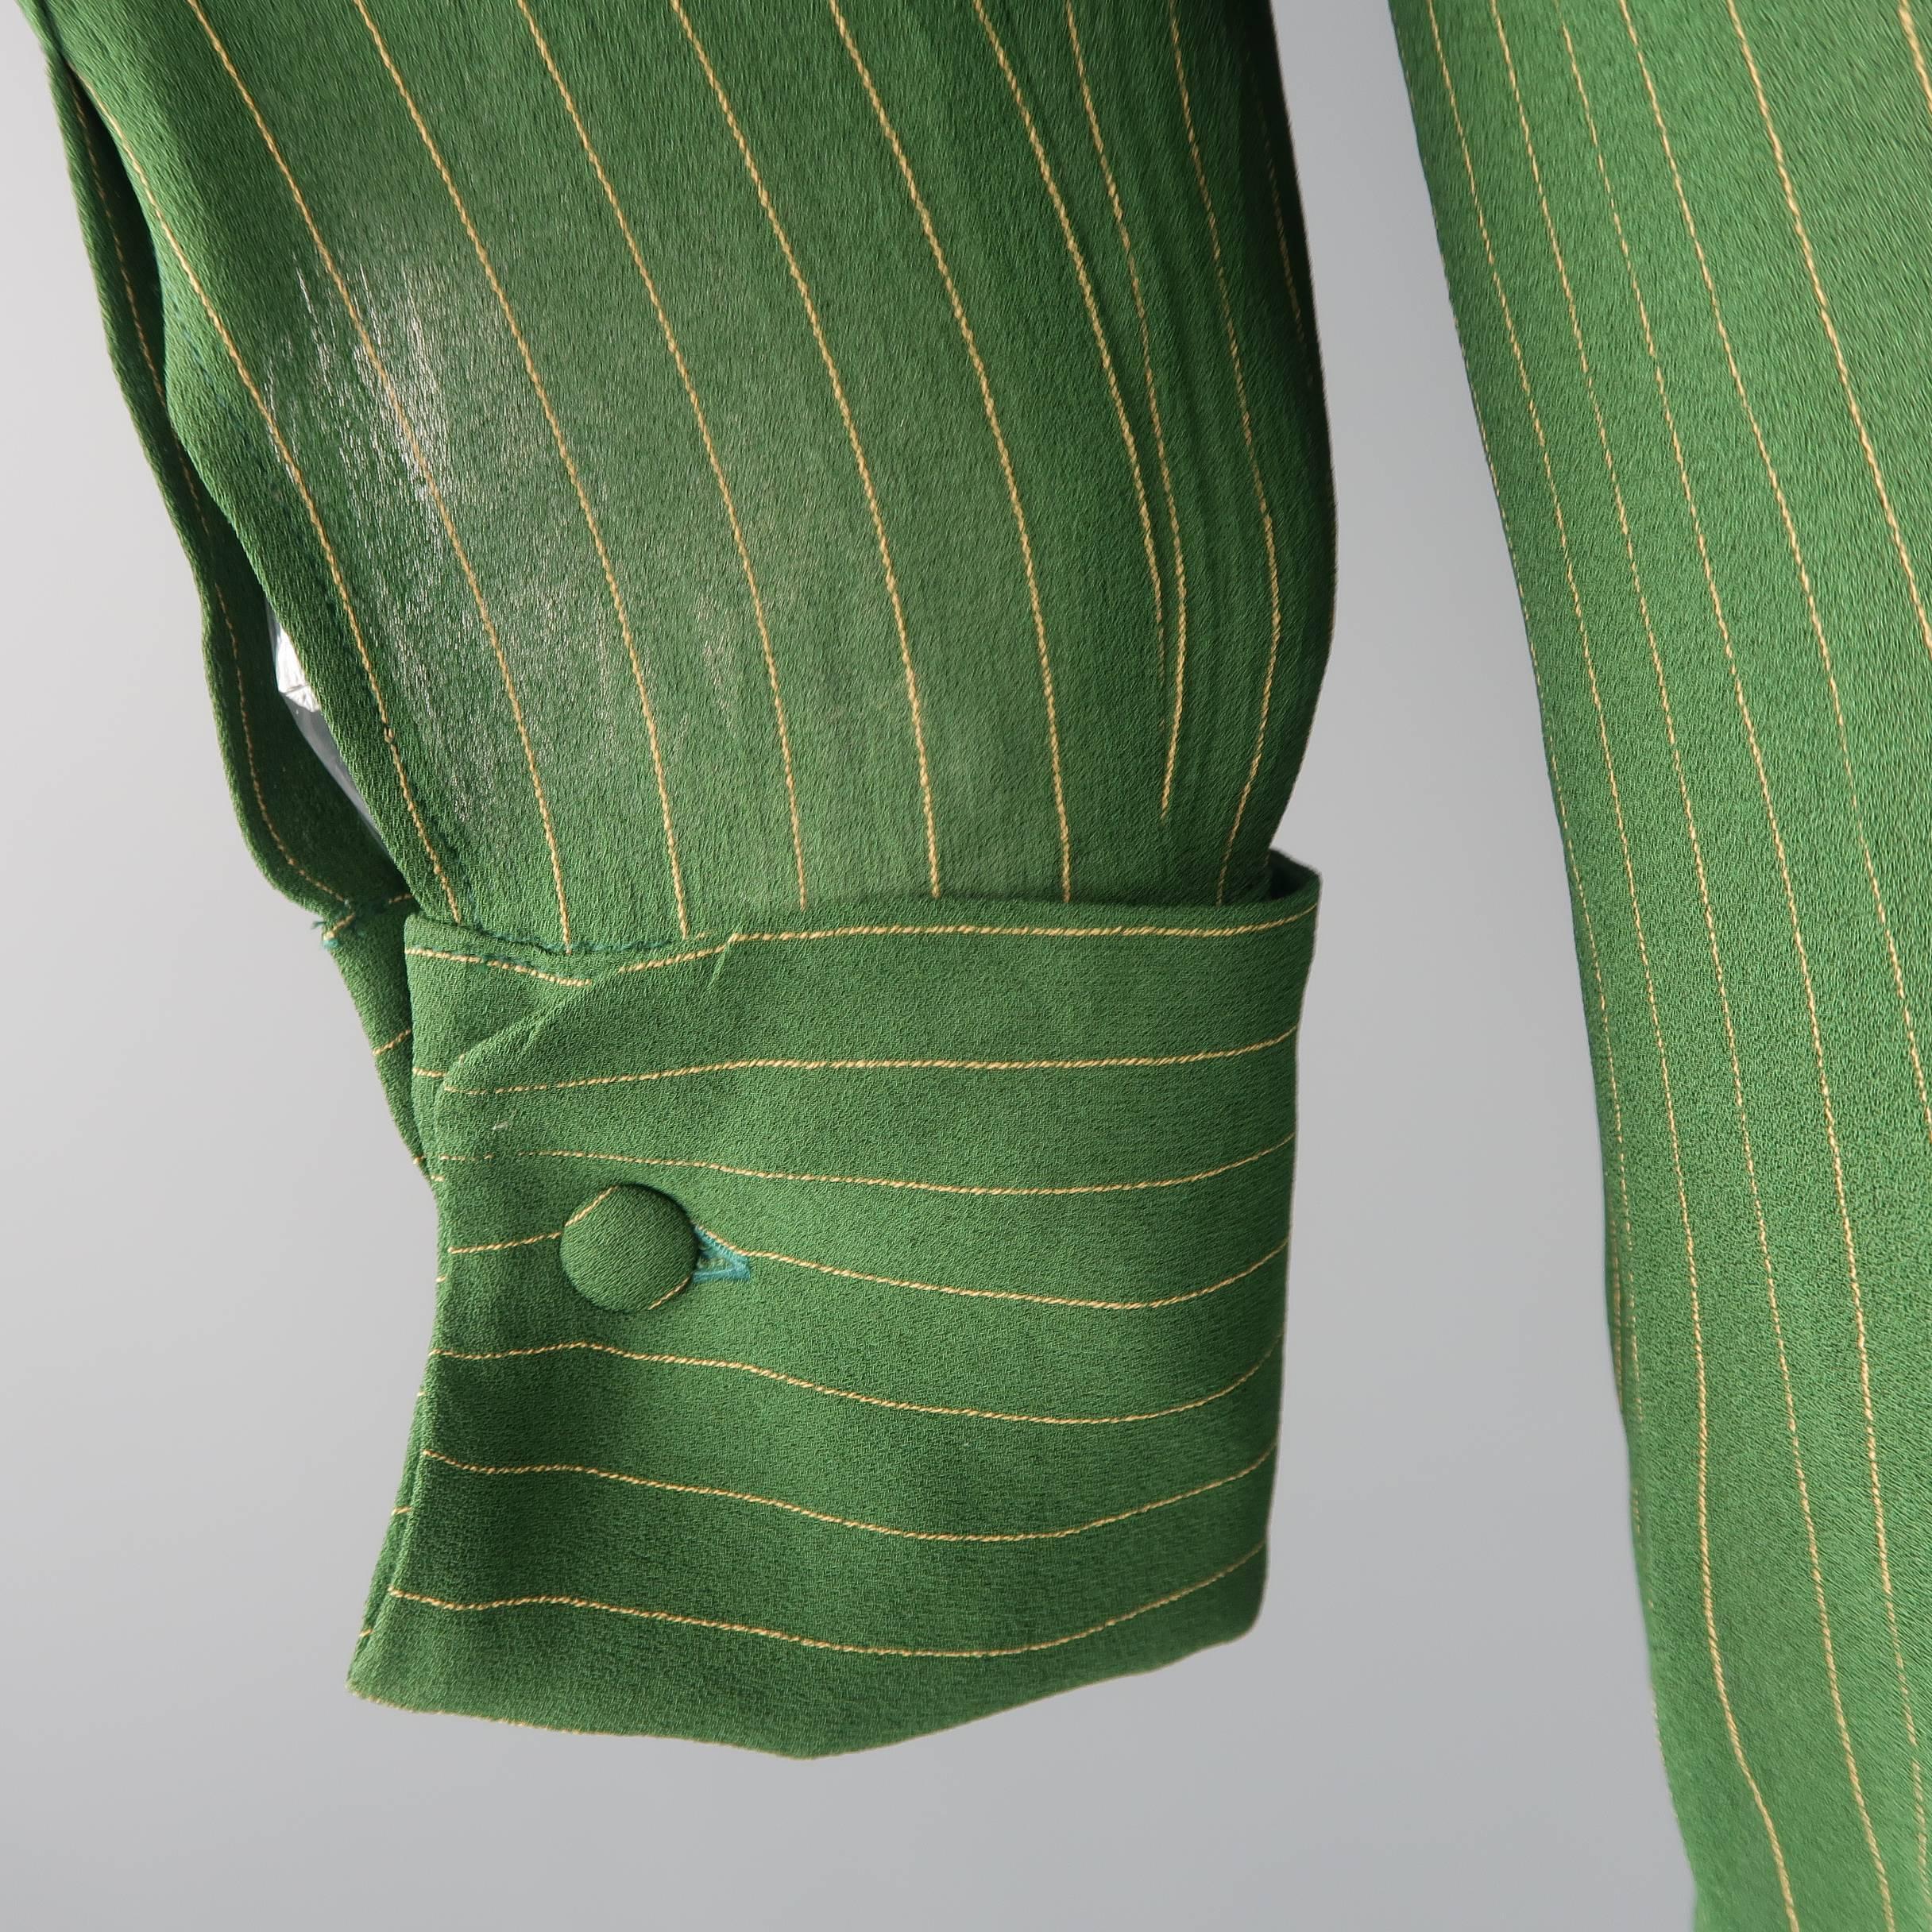 Jean Paul Gaultier Men's Green and Yellow Pinstripe Crepe French Cuff Shirt 1